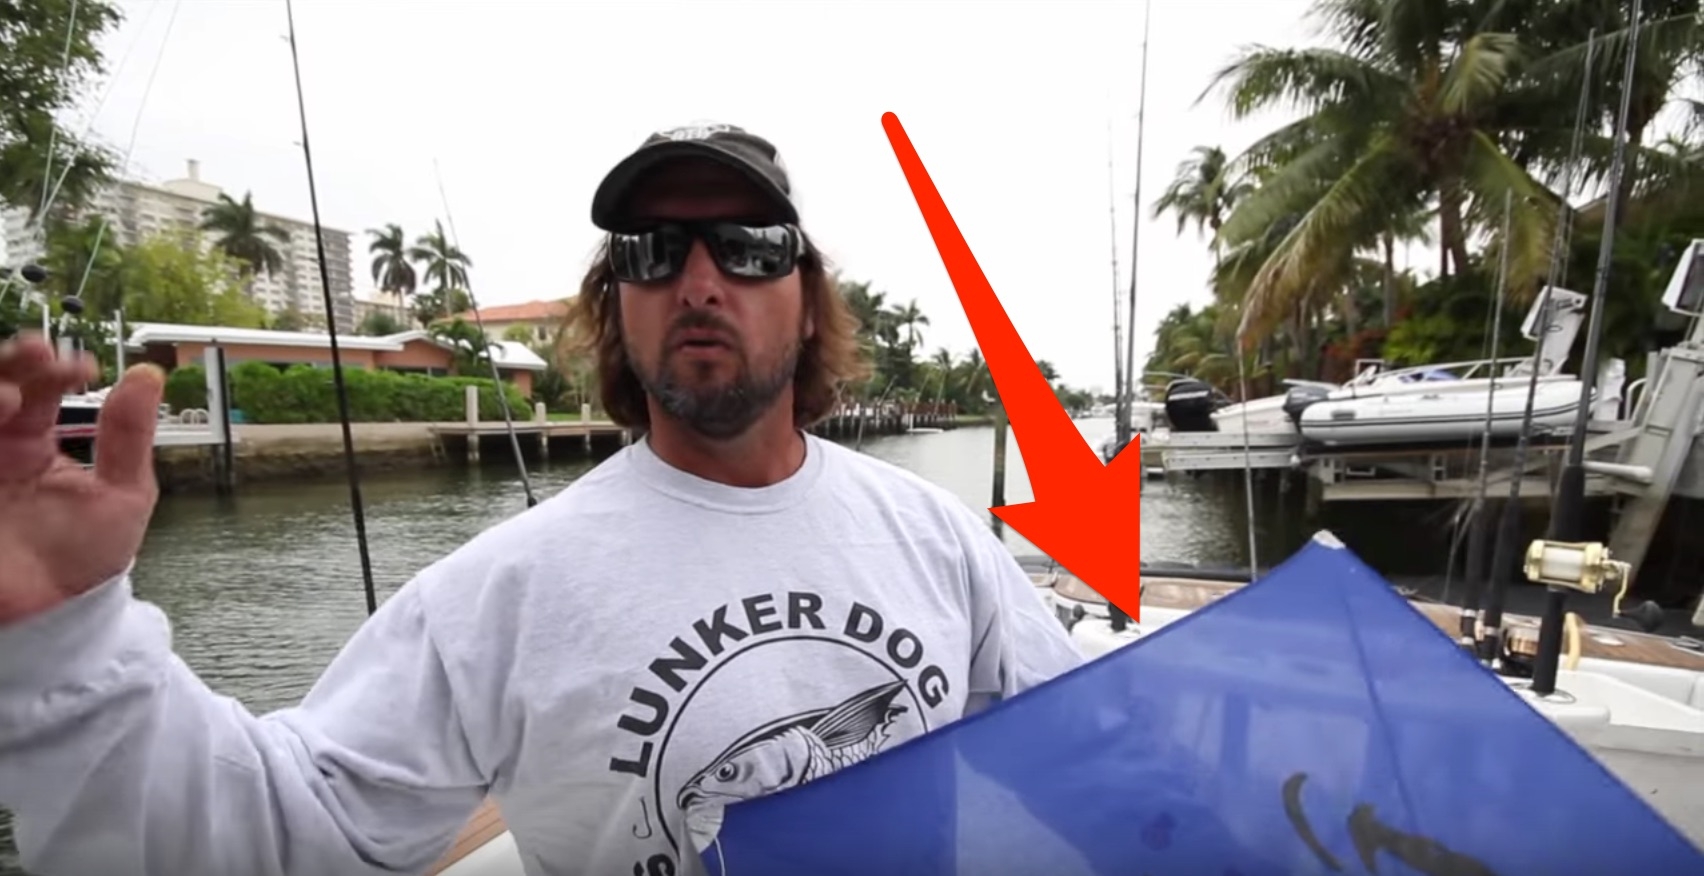 6 Saltwater Fishing Pros Share Their Best Kite Fishing Tips (VIDEO)